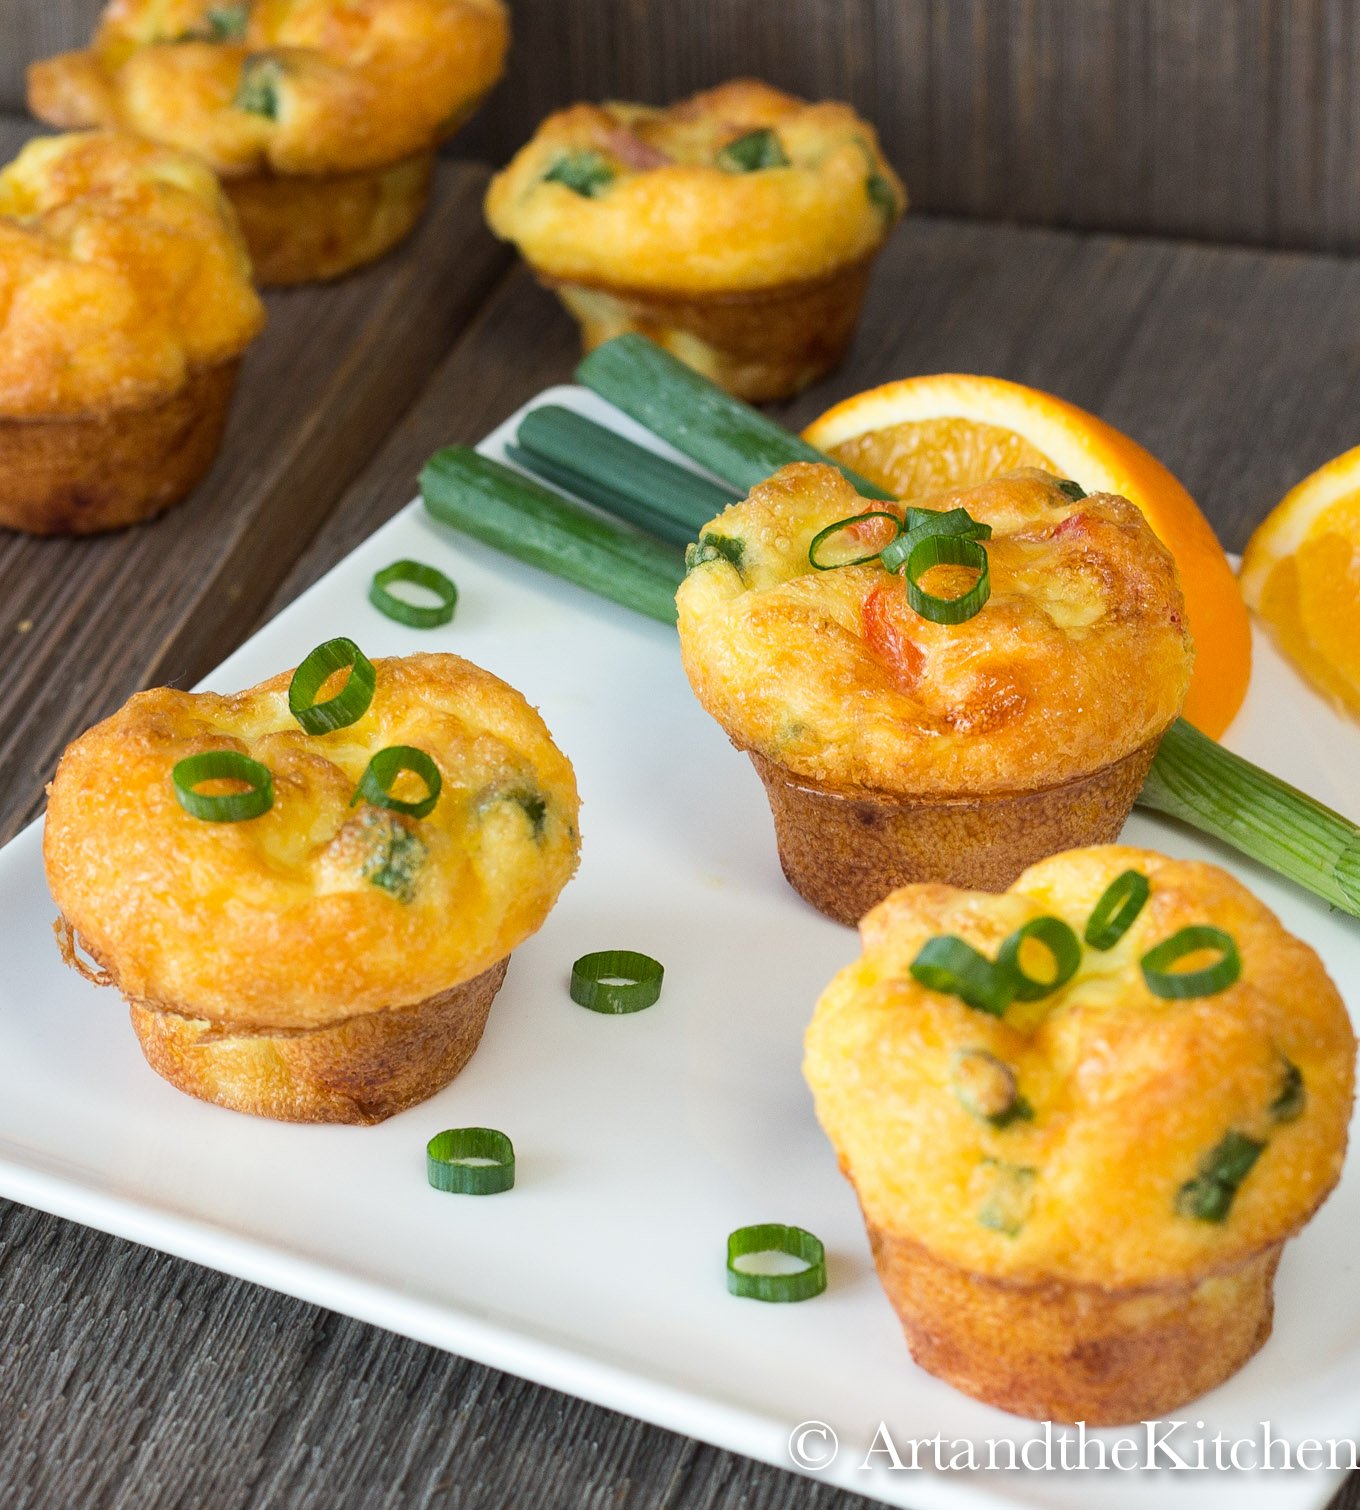 White plate filled with mini egg muffins, with green onion and orange slice garnishes.